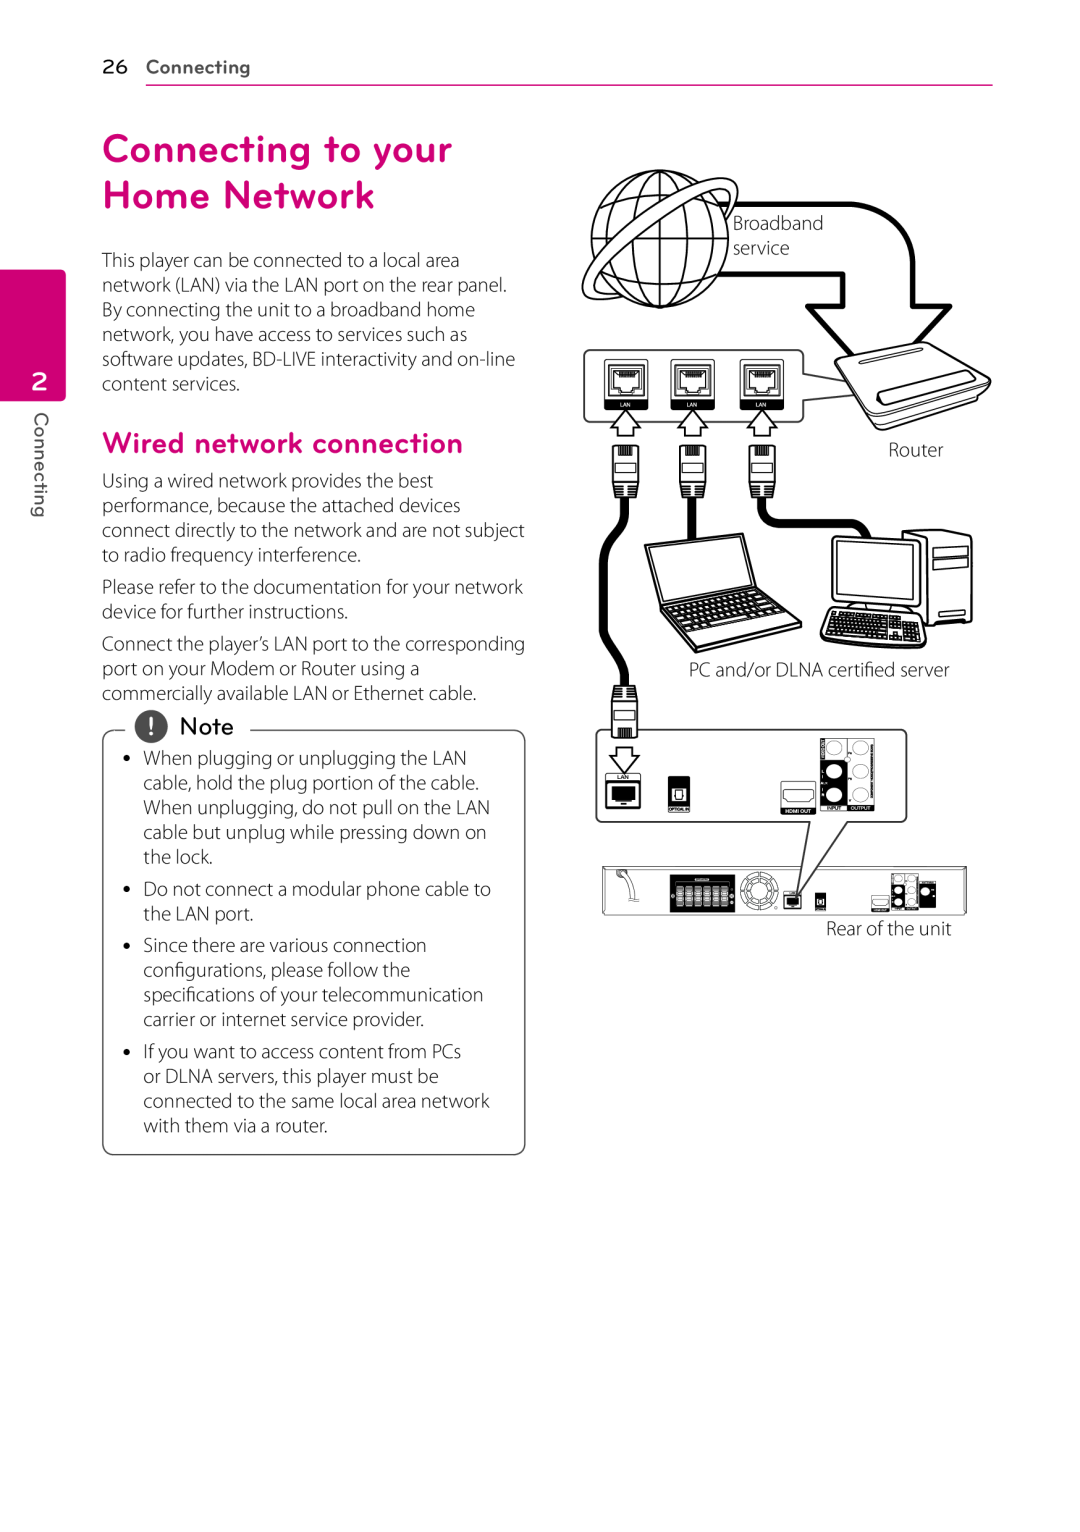 LG Electronics HB906TA, SH96TA-S, SH96SB-C, SH96TA-W Connecting to your Home Network, Wired network connection, 26Connecting 